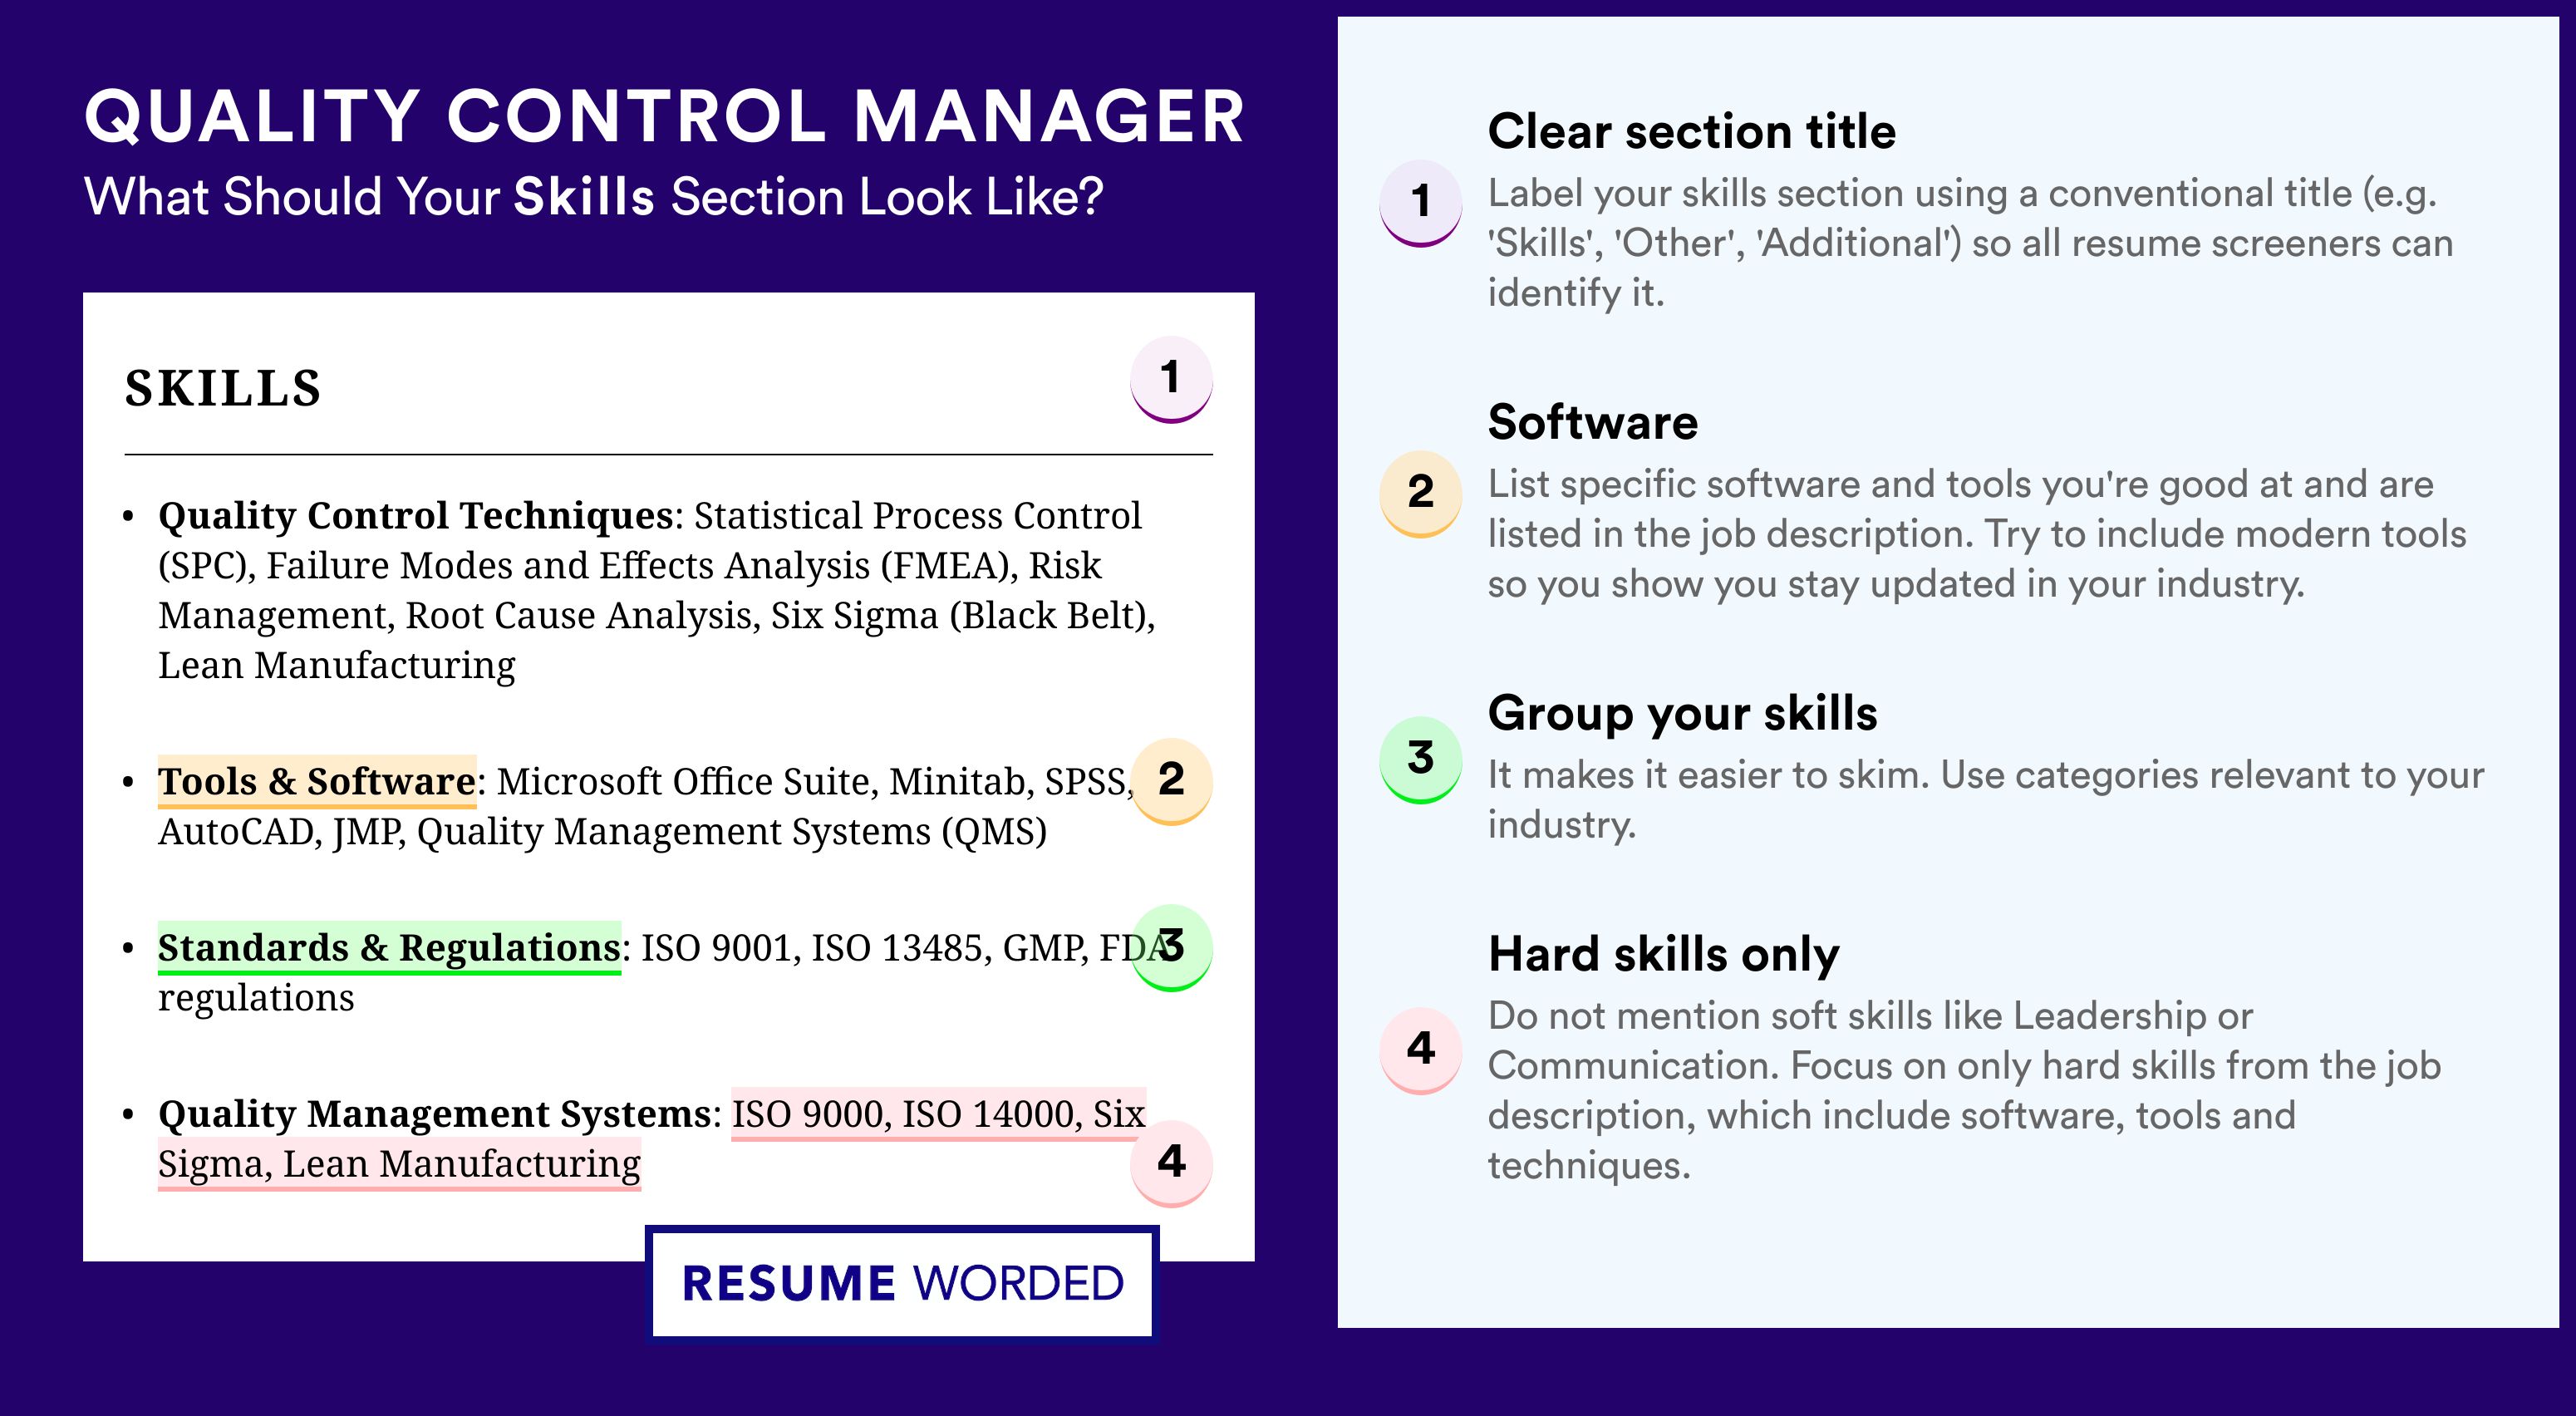 How To Write Your Skills Section - Quality Control Manager Roles